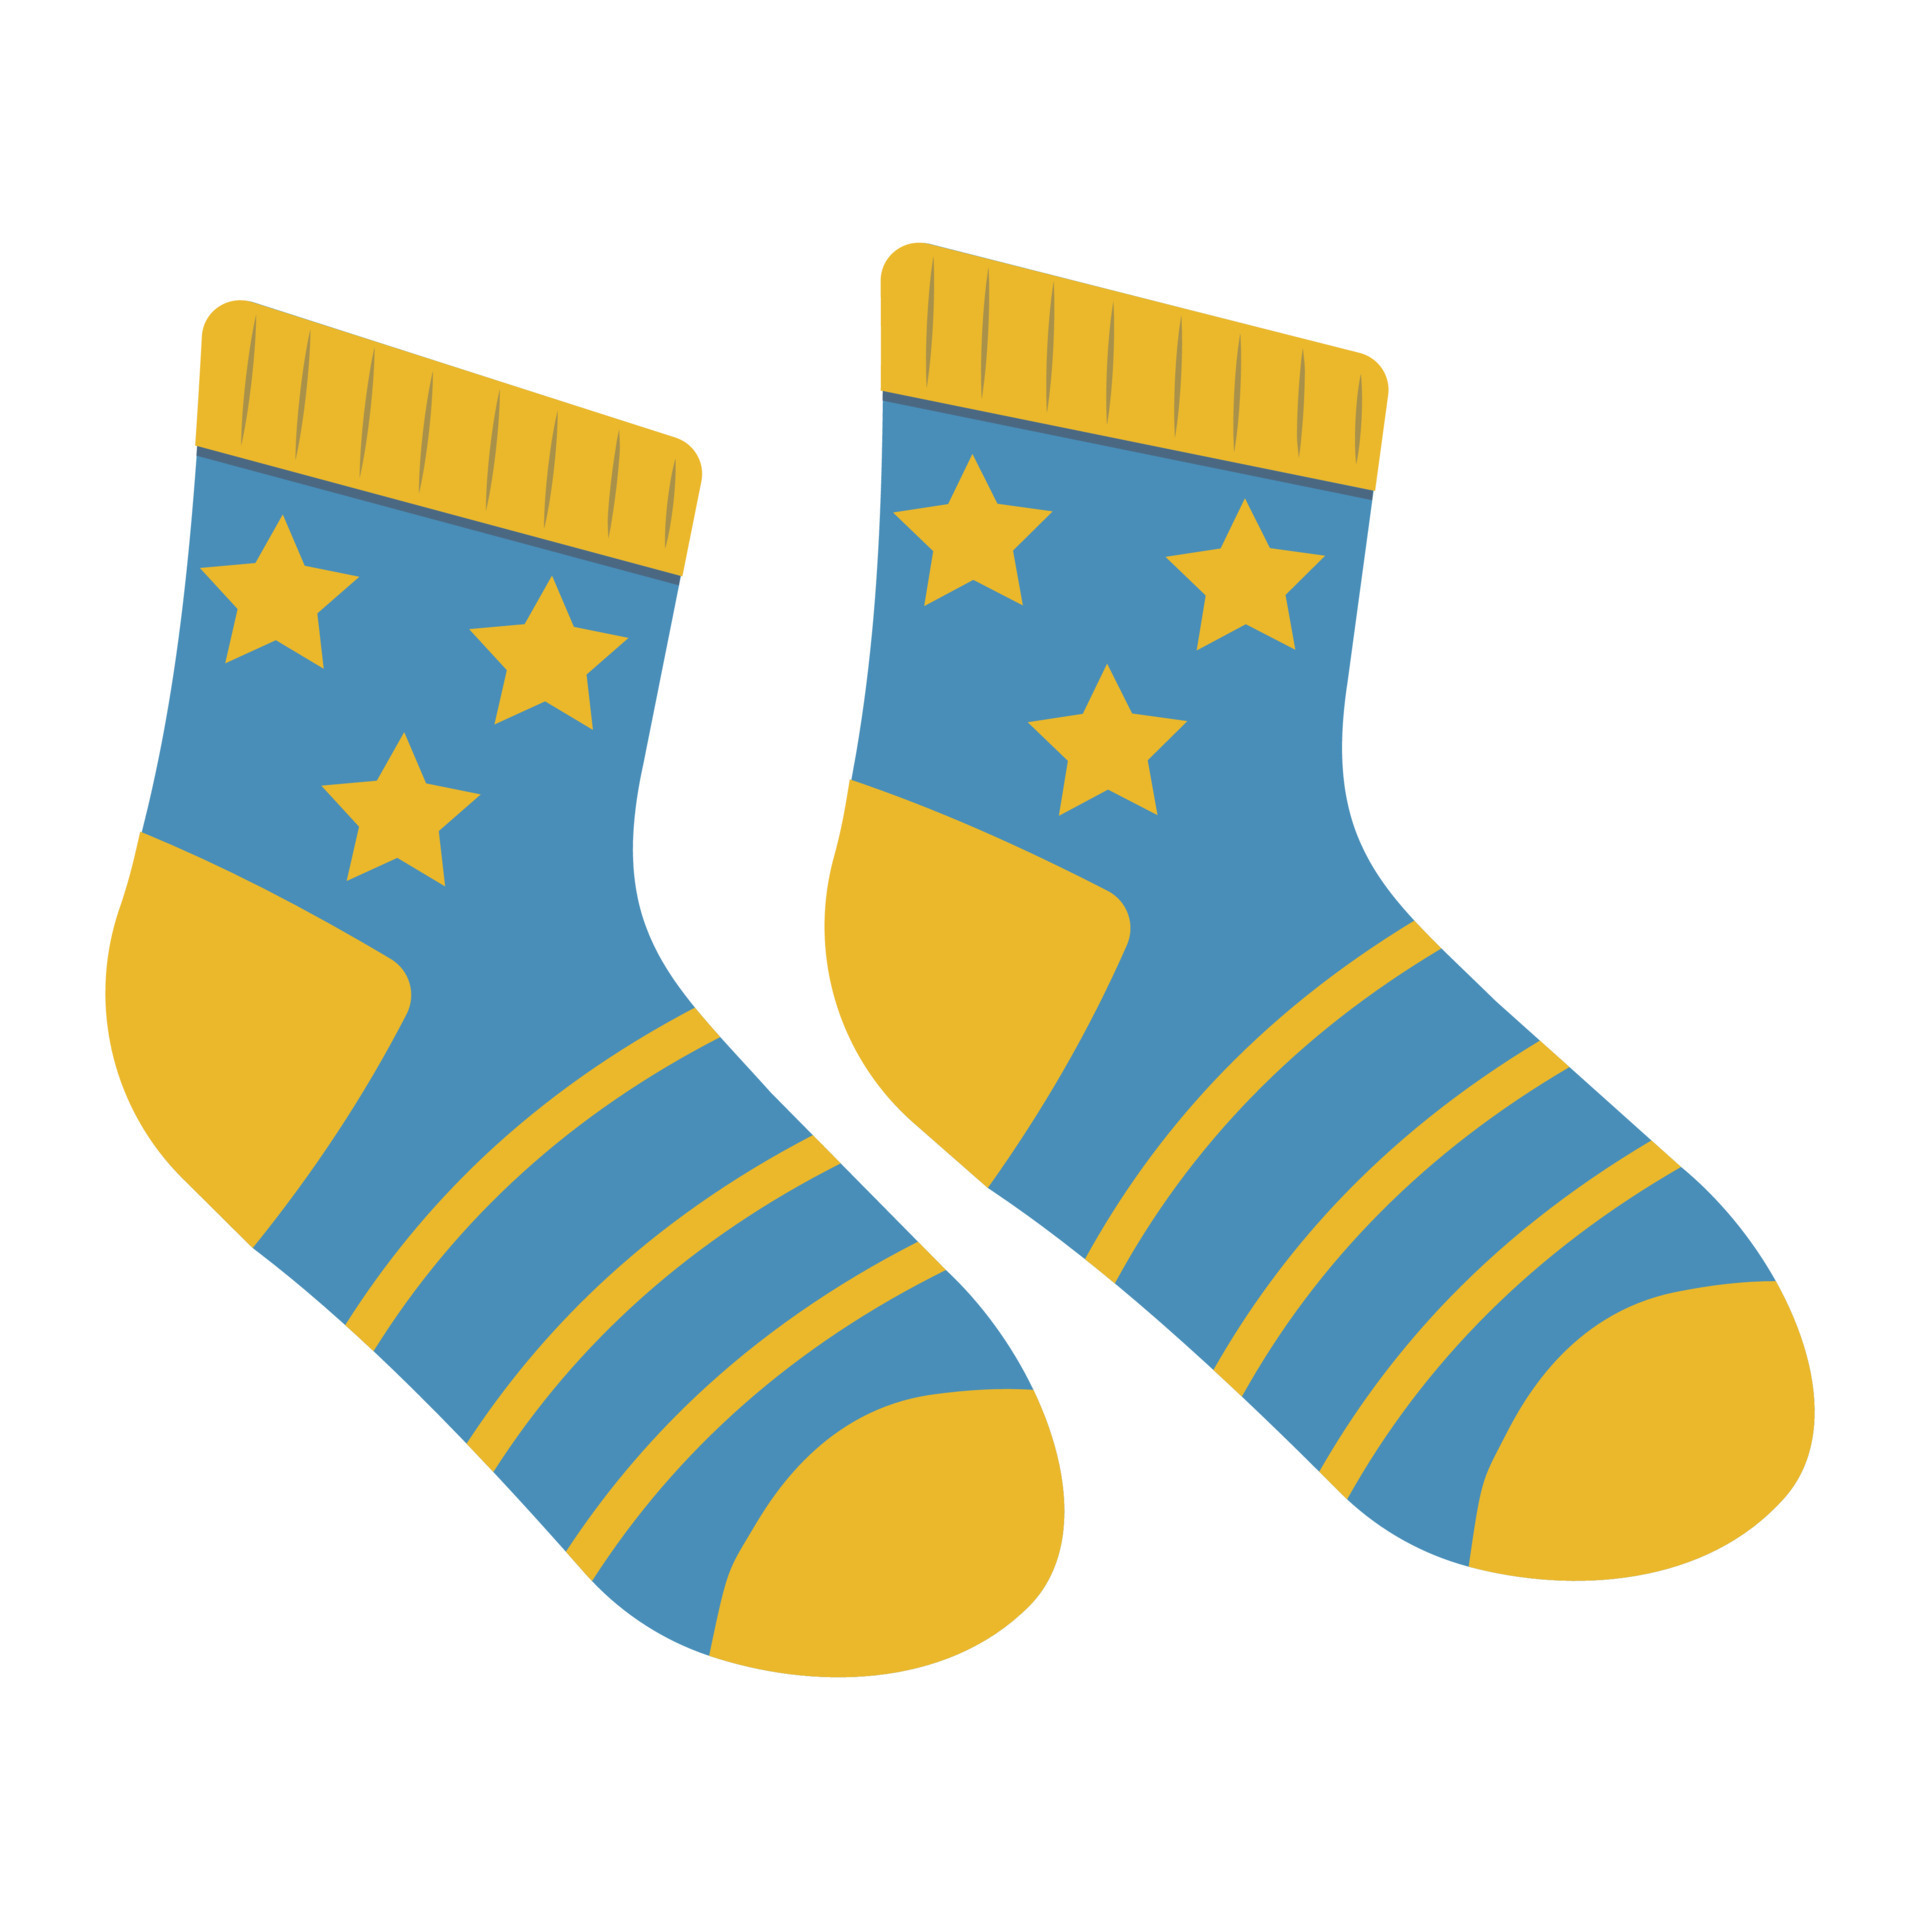 Children's colored socks, vector isolated cartoon-style